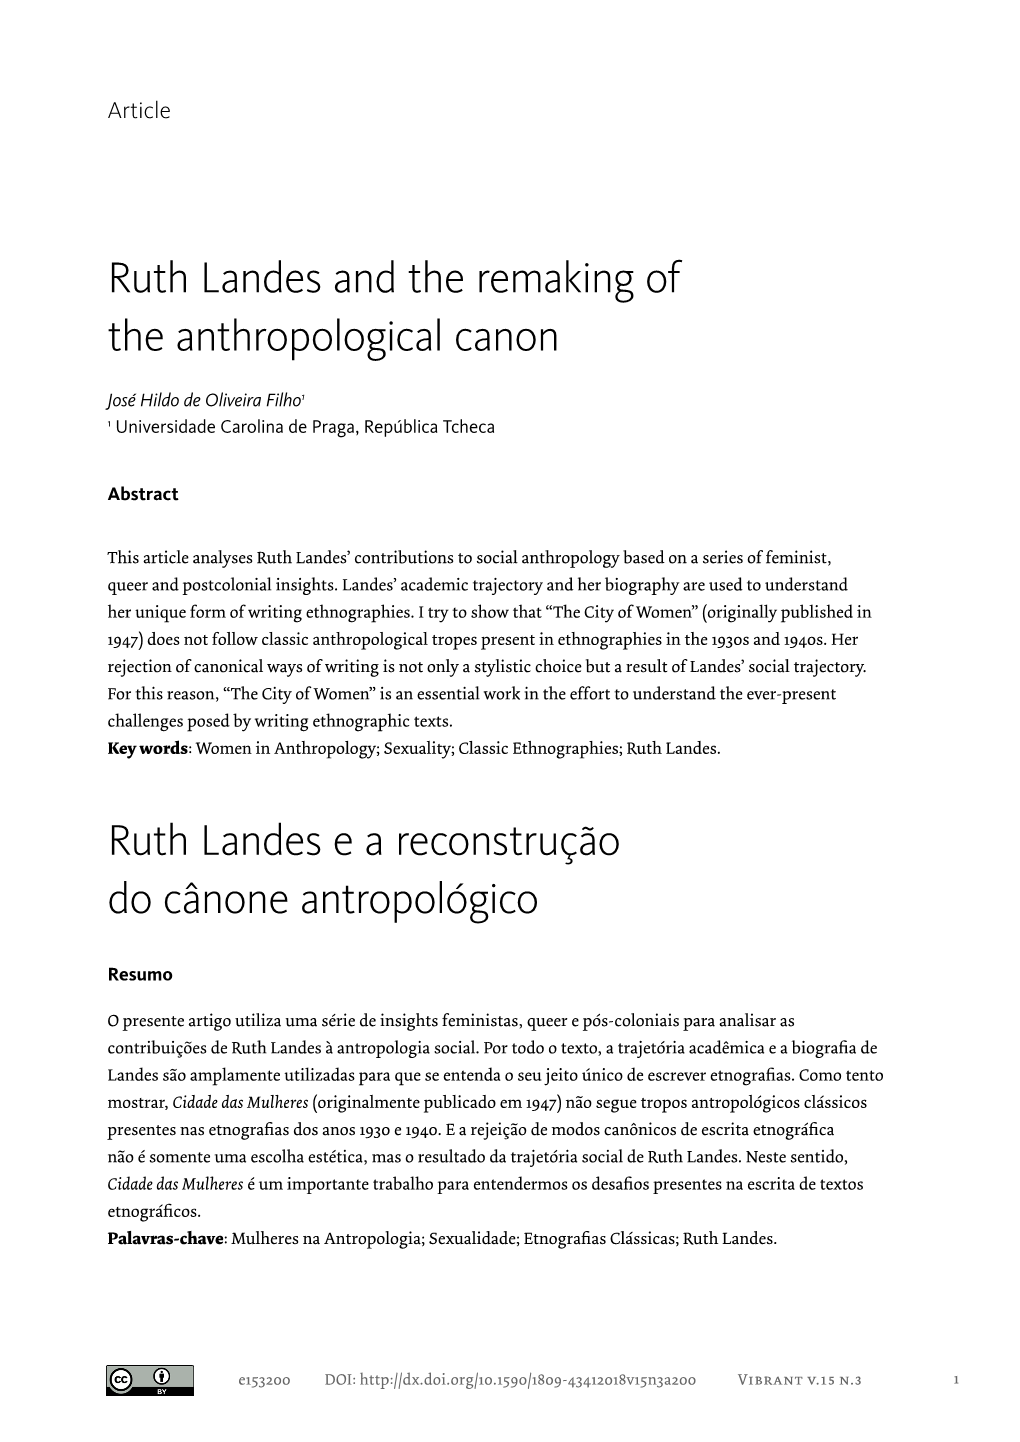 Ruth Landes and the Remaking of the Anthropological Canon